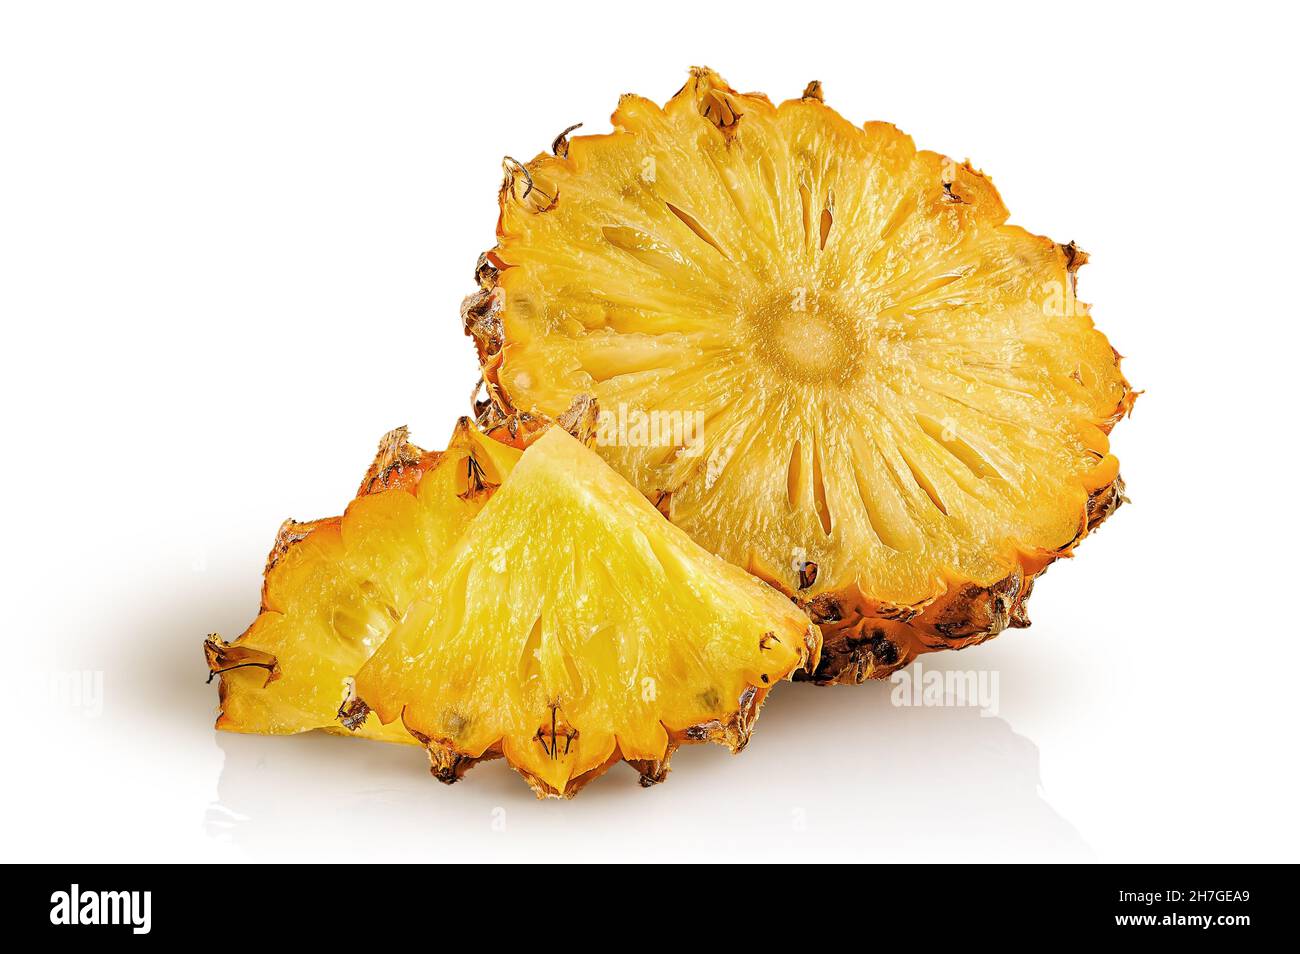 Half pineapple and slices isolated on white background Stock Photo